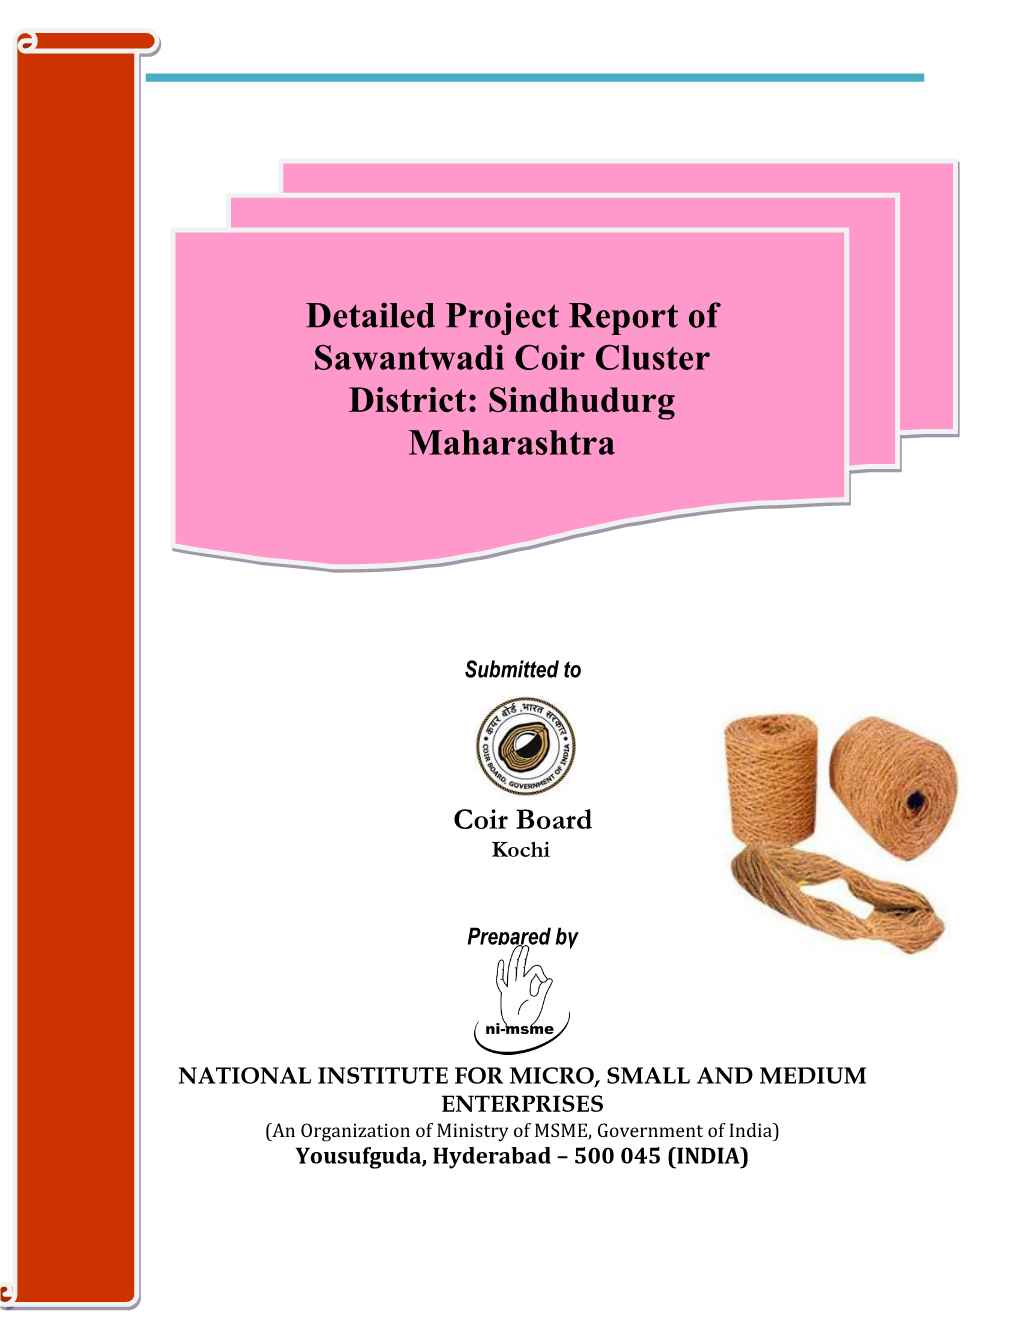 Detailed Project Report of Sawantwadi Coir Cluster District